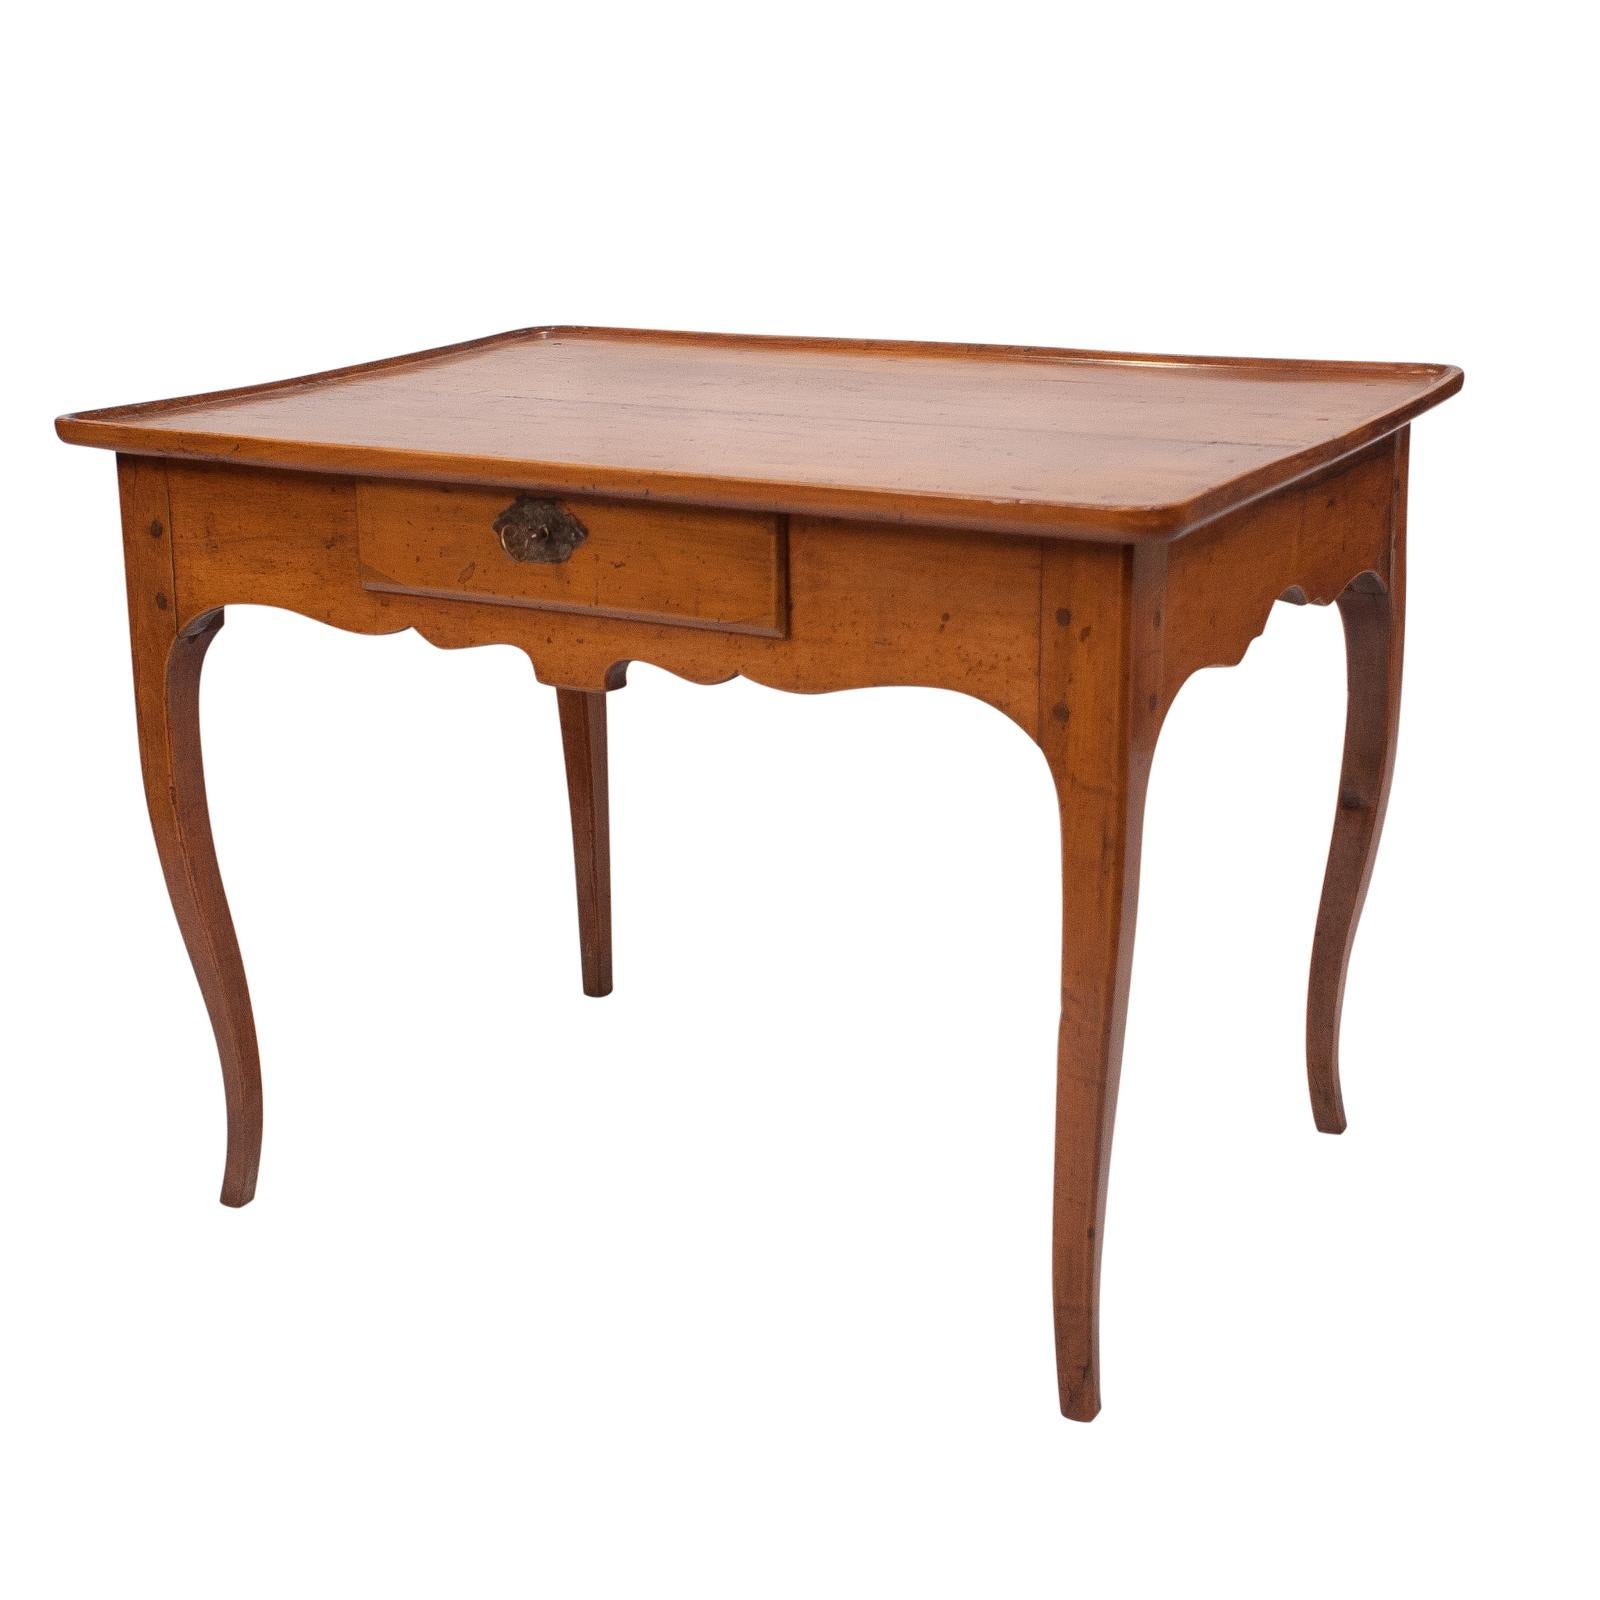 A short late 18th early 19th century French cherry one drawer table, circa 1800. Graceful small one drawer dish topped rectangular table. Perfect size for a coffee table. 

